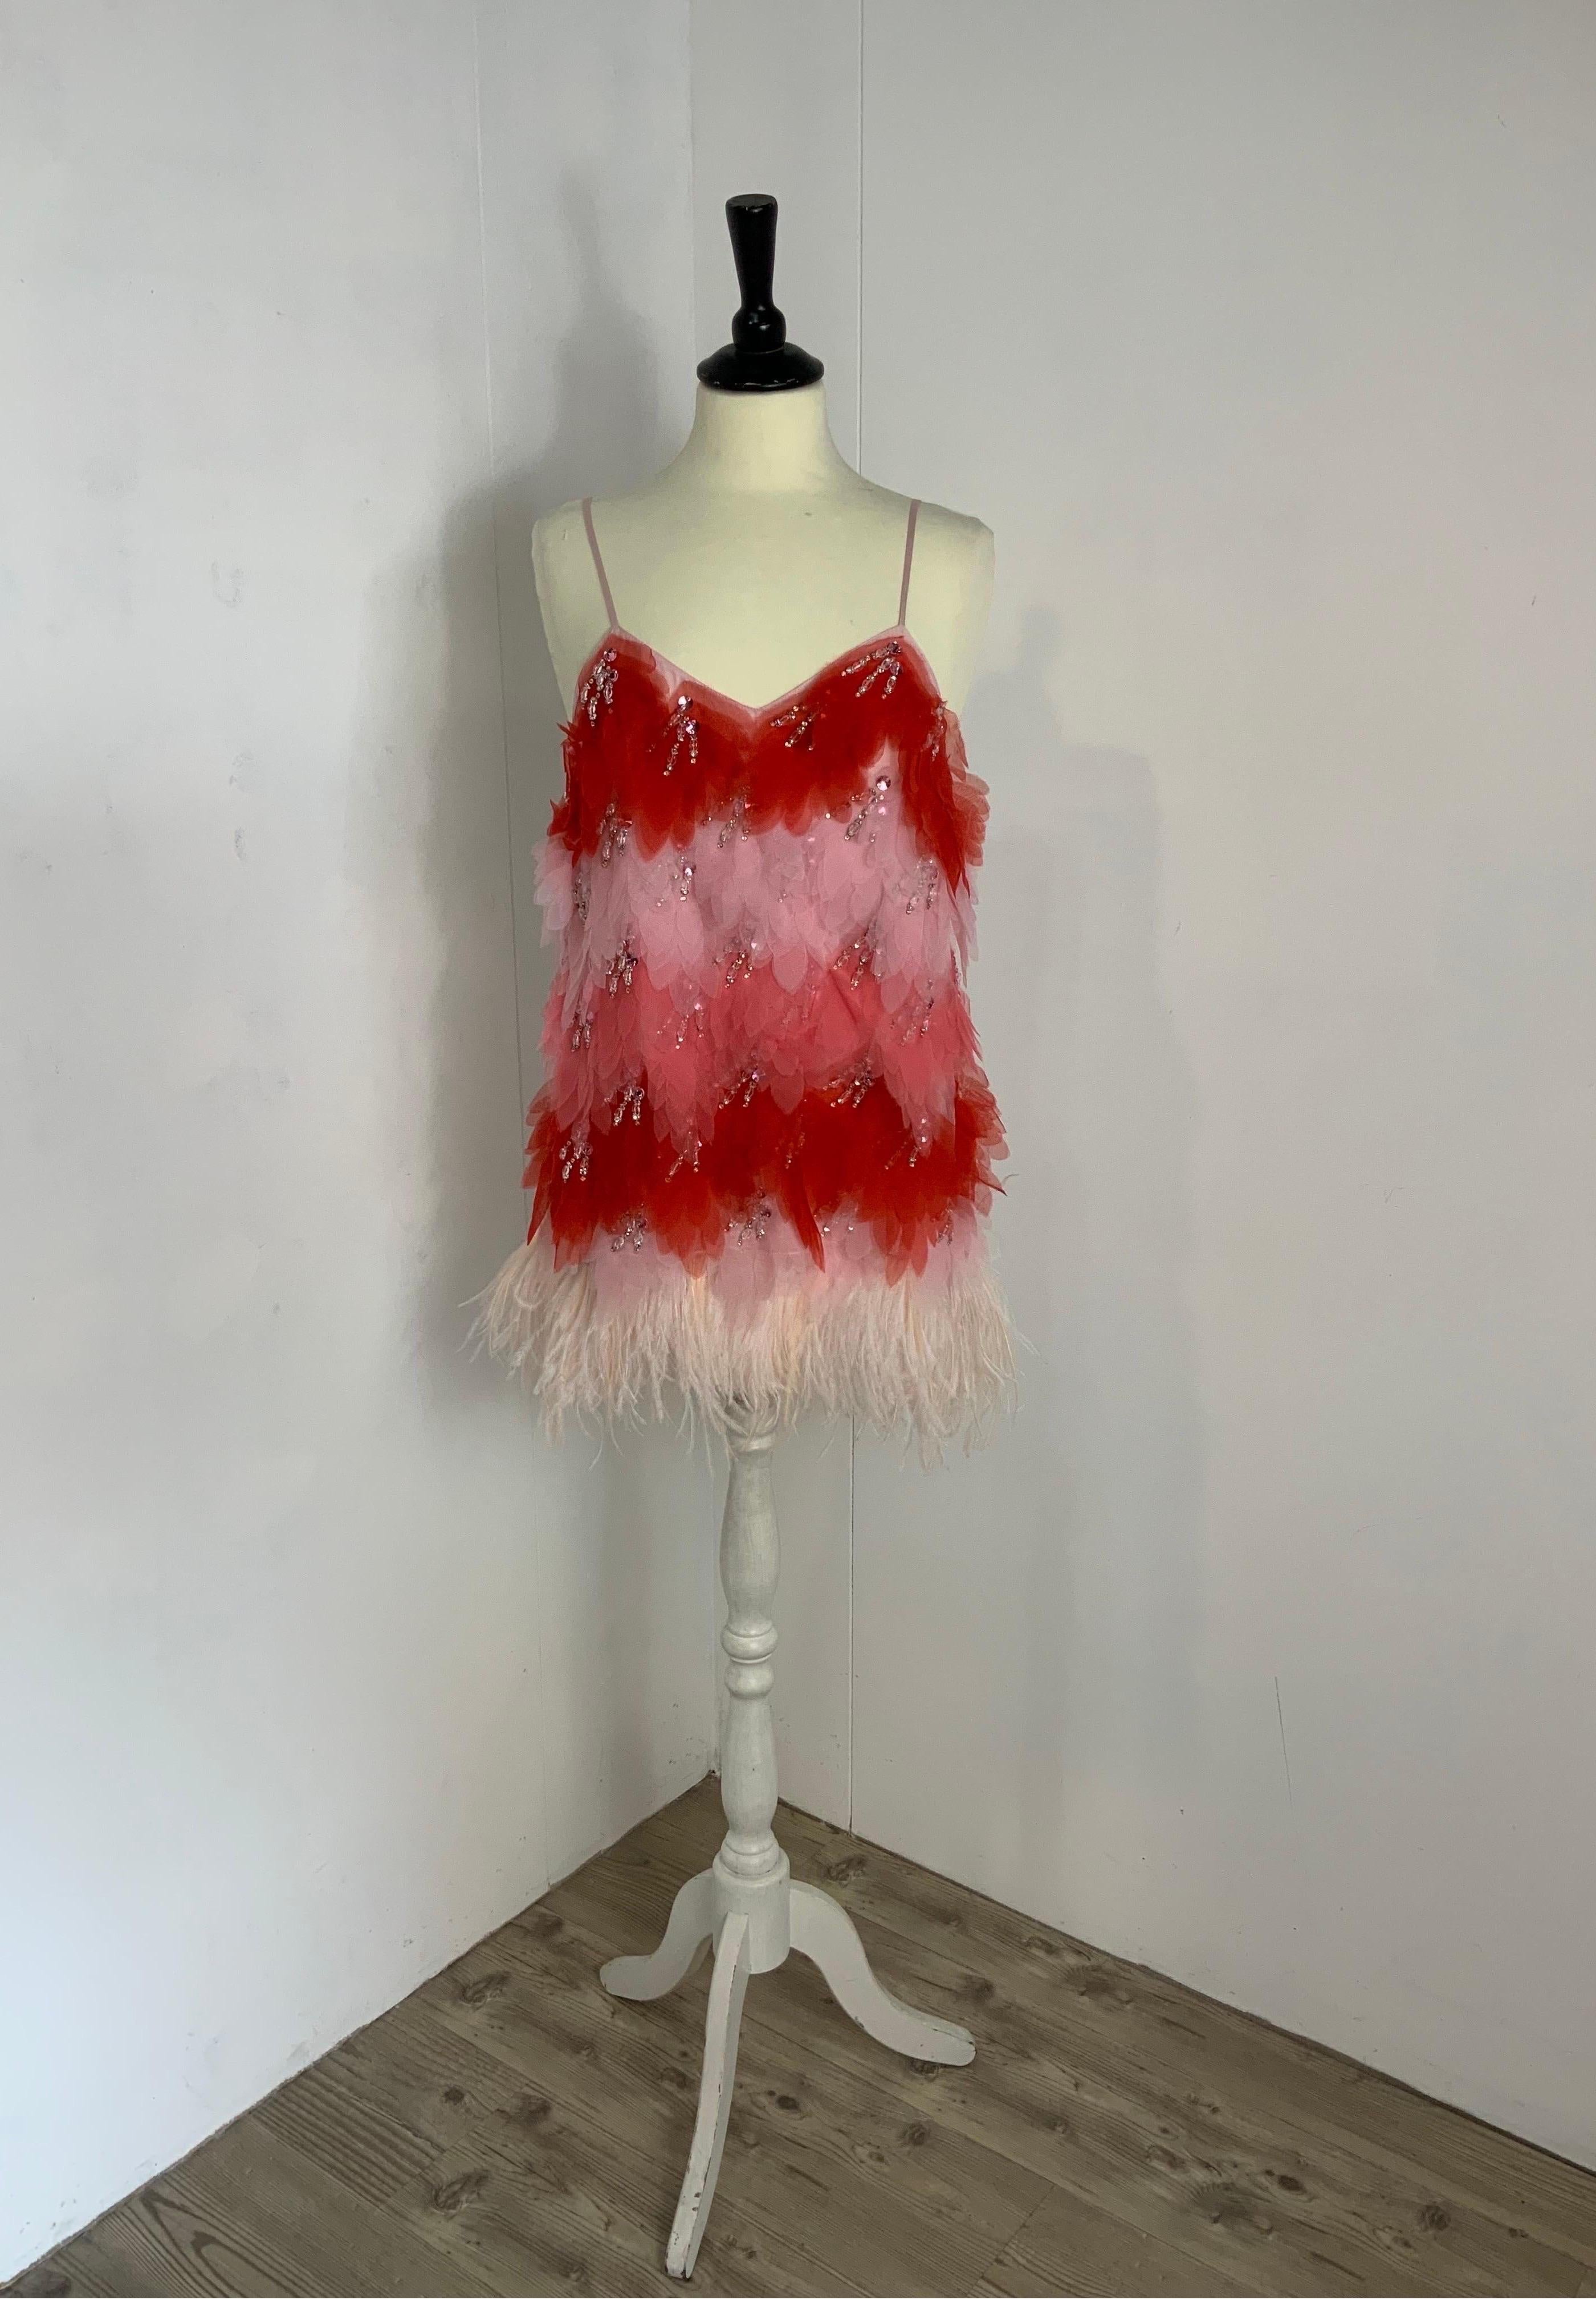 KOCHÉ X PUCCI.
In silk with ostrich feather inserts.
If desired, the part of the feathers can be removed at will using special buttons. Side zip closure.
Italian size 40.
Bust 42cm
Length 80 cm
New with tag.
Beautiful cloth . If desired, it can also